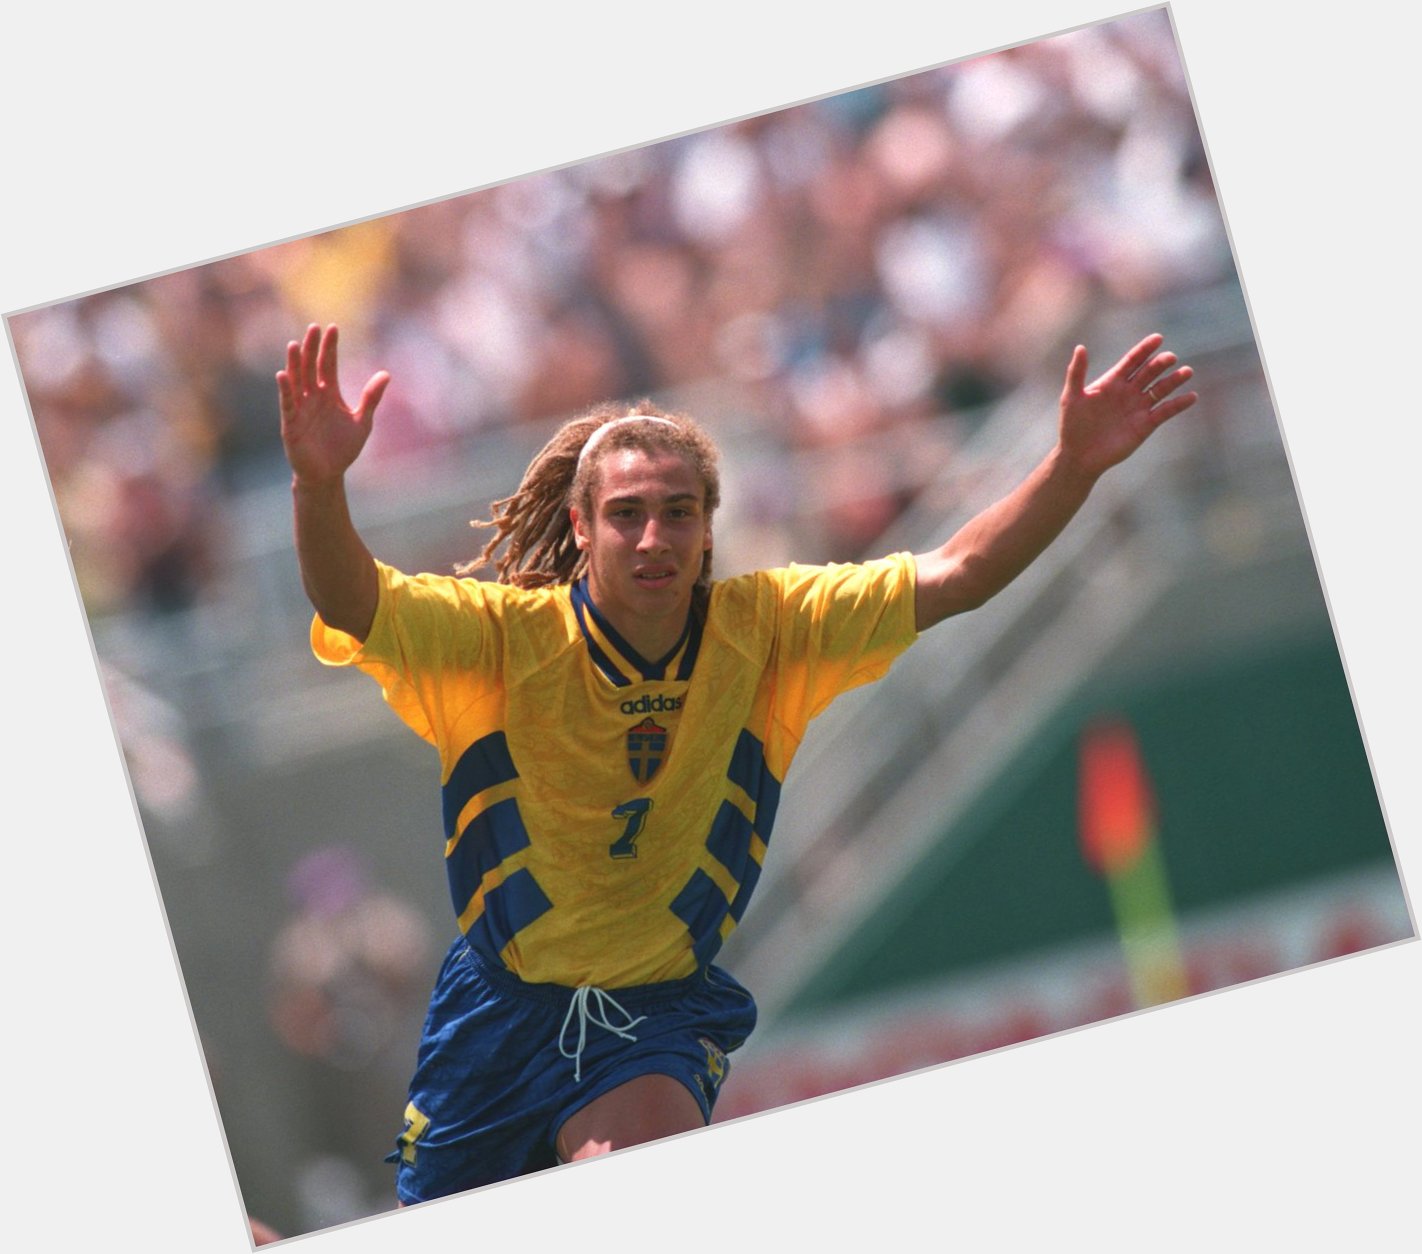 Remember the dreads?

Happy birthday to ex- Sweden,  and legend, Henrik Larsson - 46 today! 